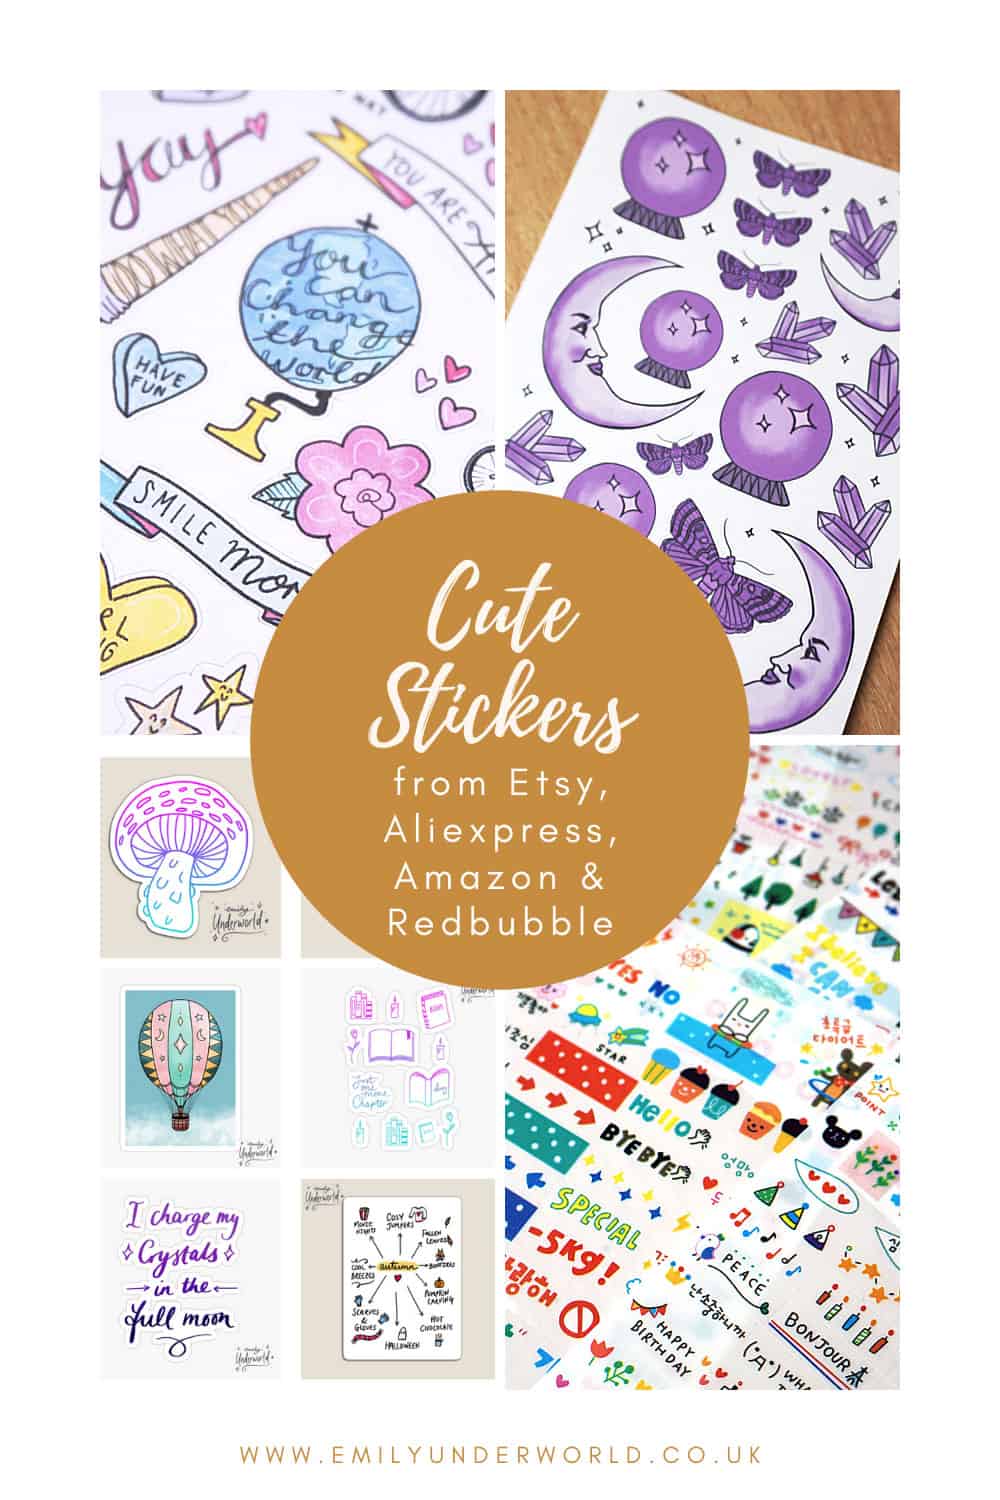 Cute Stickers from Etsy, Aliexpress, Amazon and Redbubble.